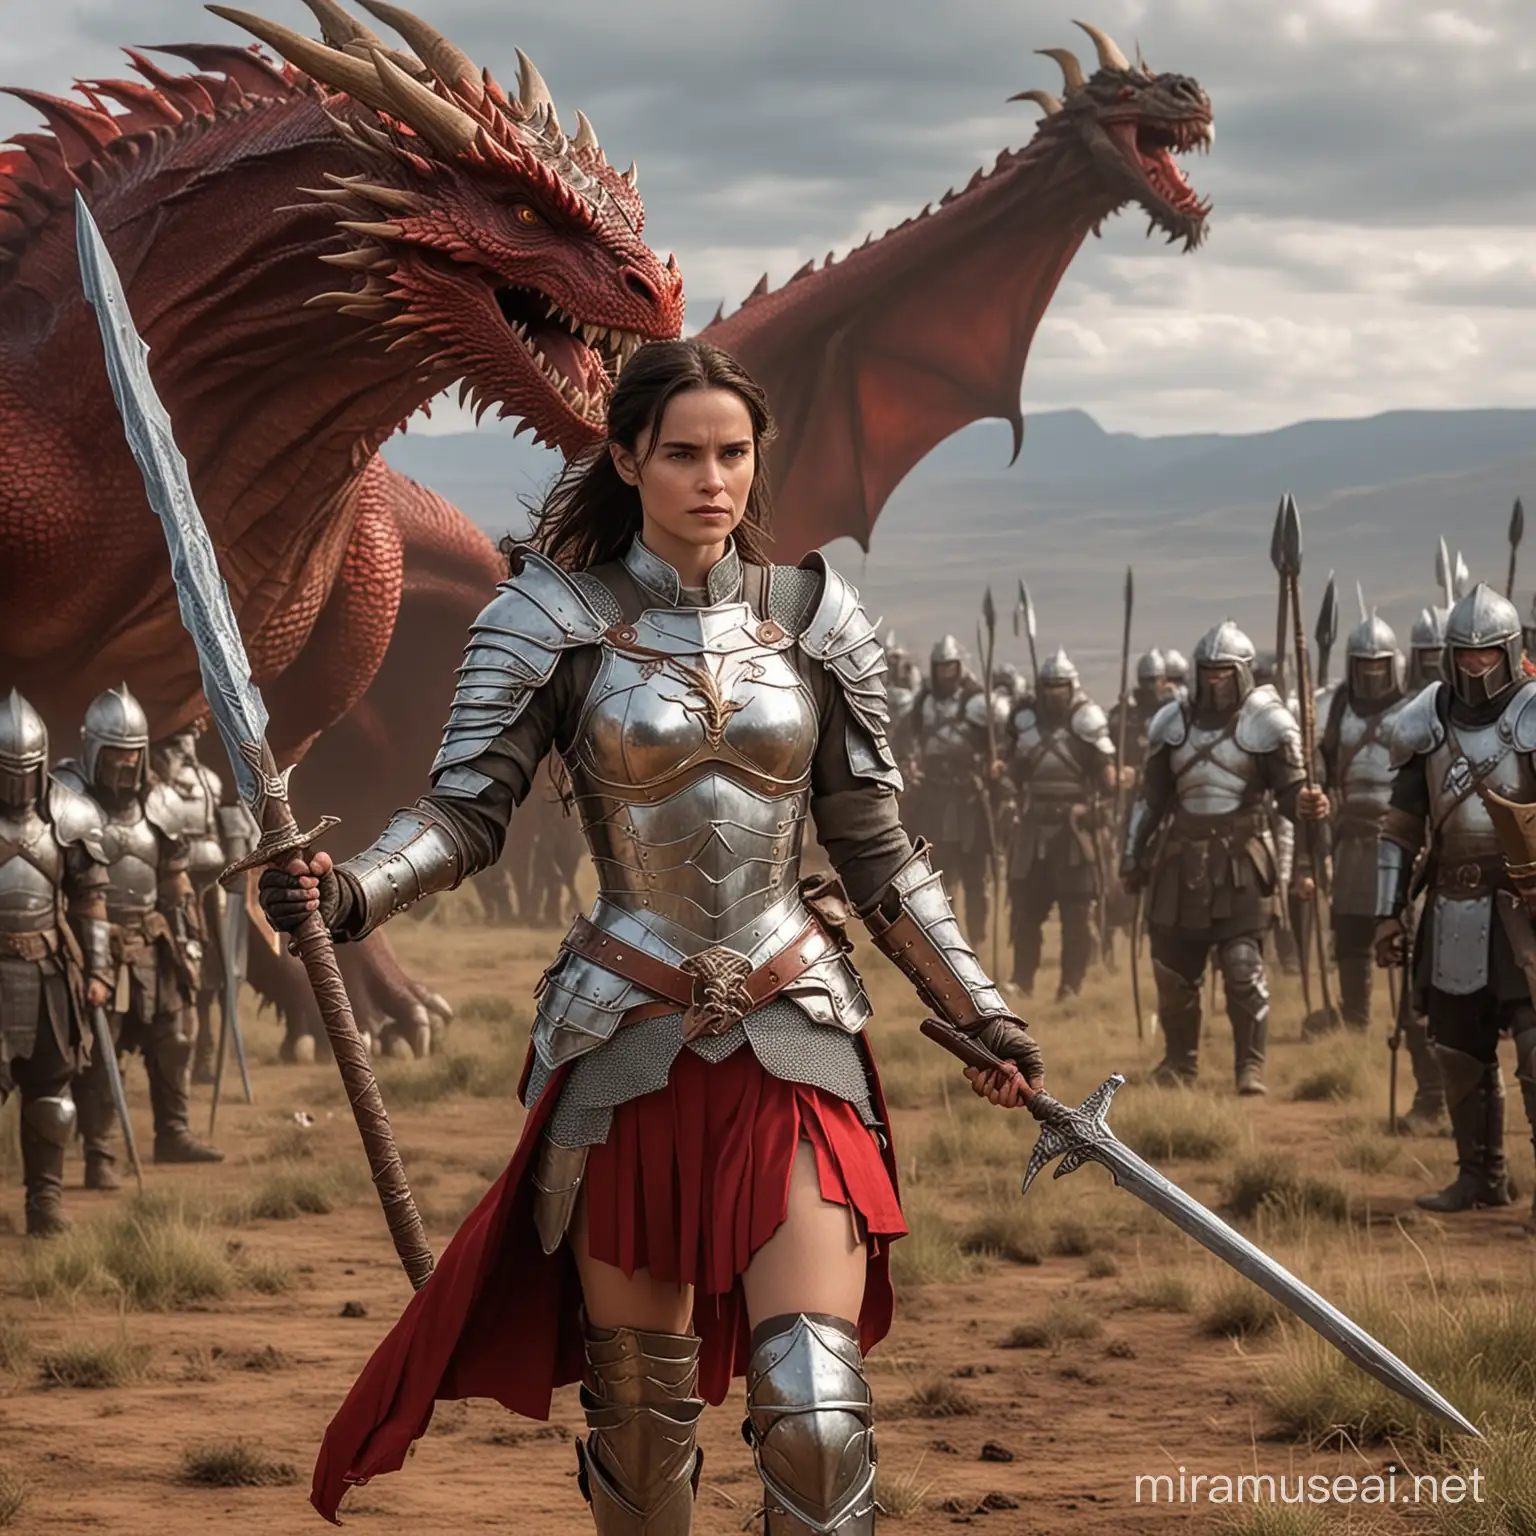 Young Jennifer Connely dressed in plate armor holding a long spear in one hand infront of a red dragon fighting in a battlefield with orcs